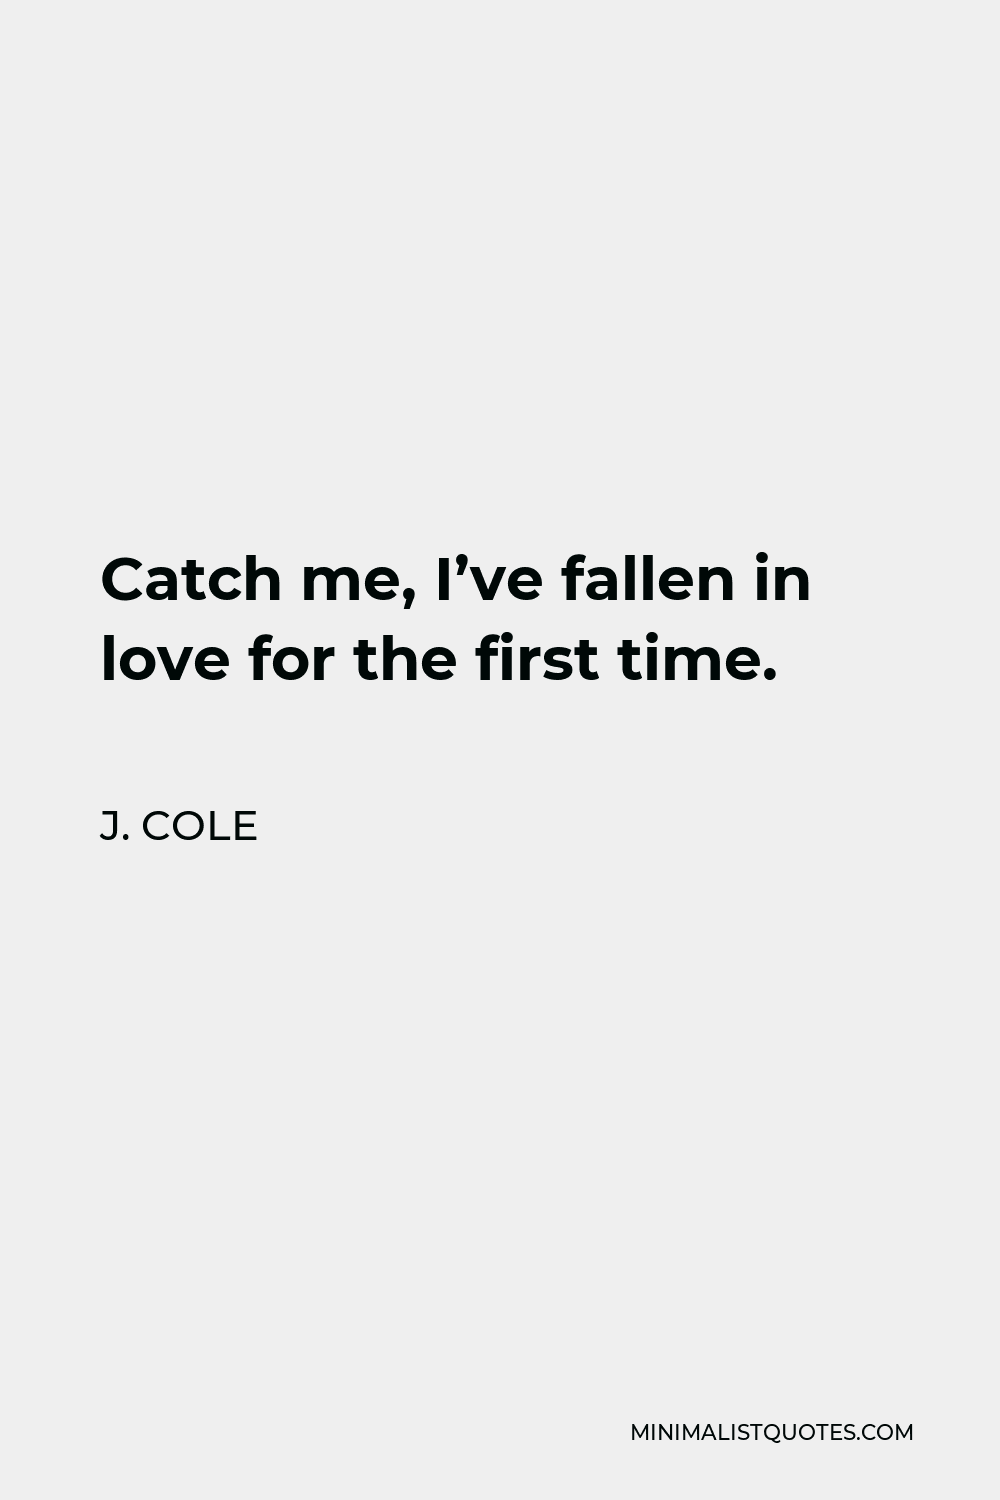 J. Cole Quote - Catch me, I’ve fallen in love for the first time.